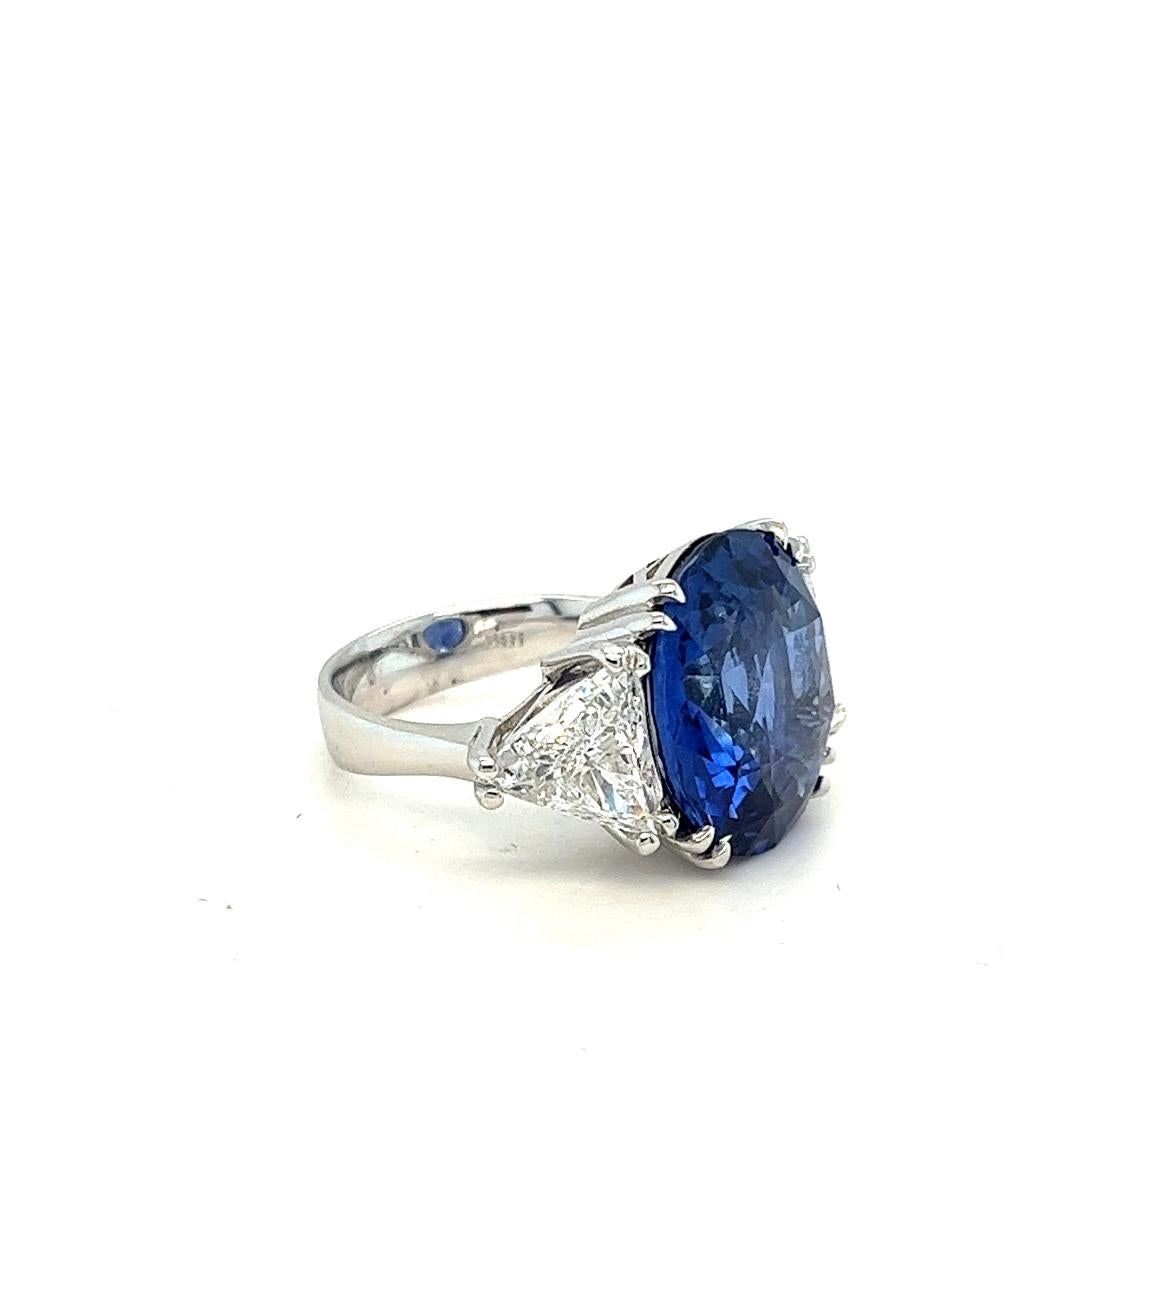 GIA Certified 14.64 Carat Blue Sapphire Diamond Ring For Sale 2